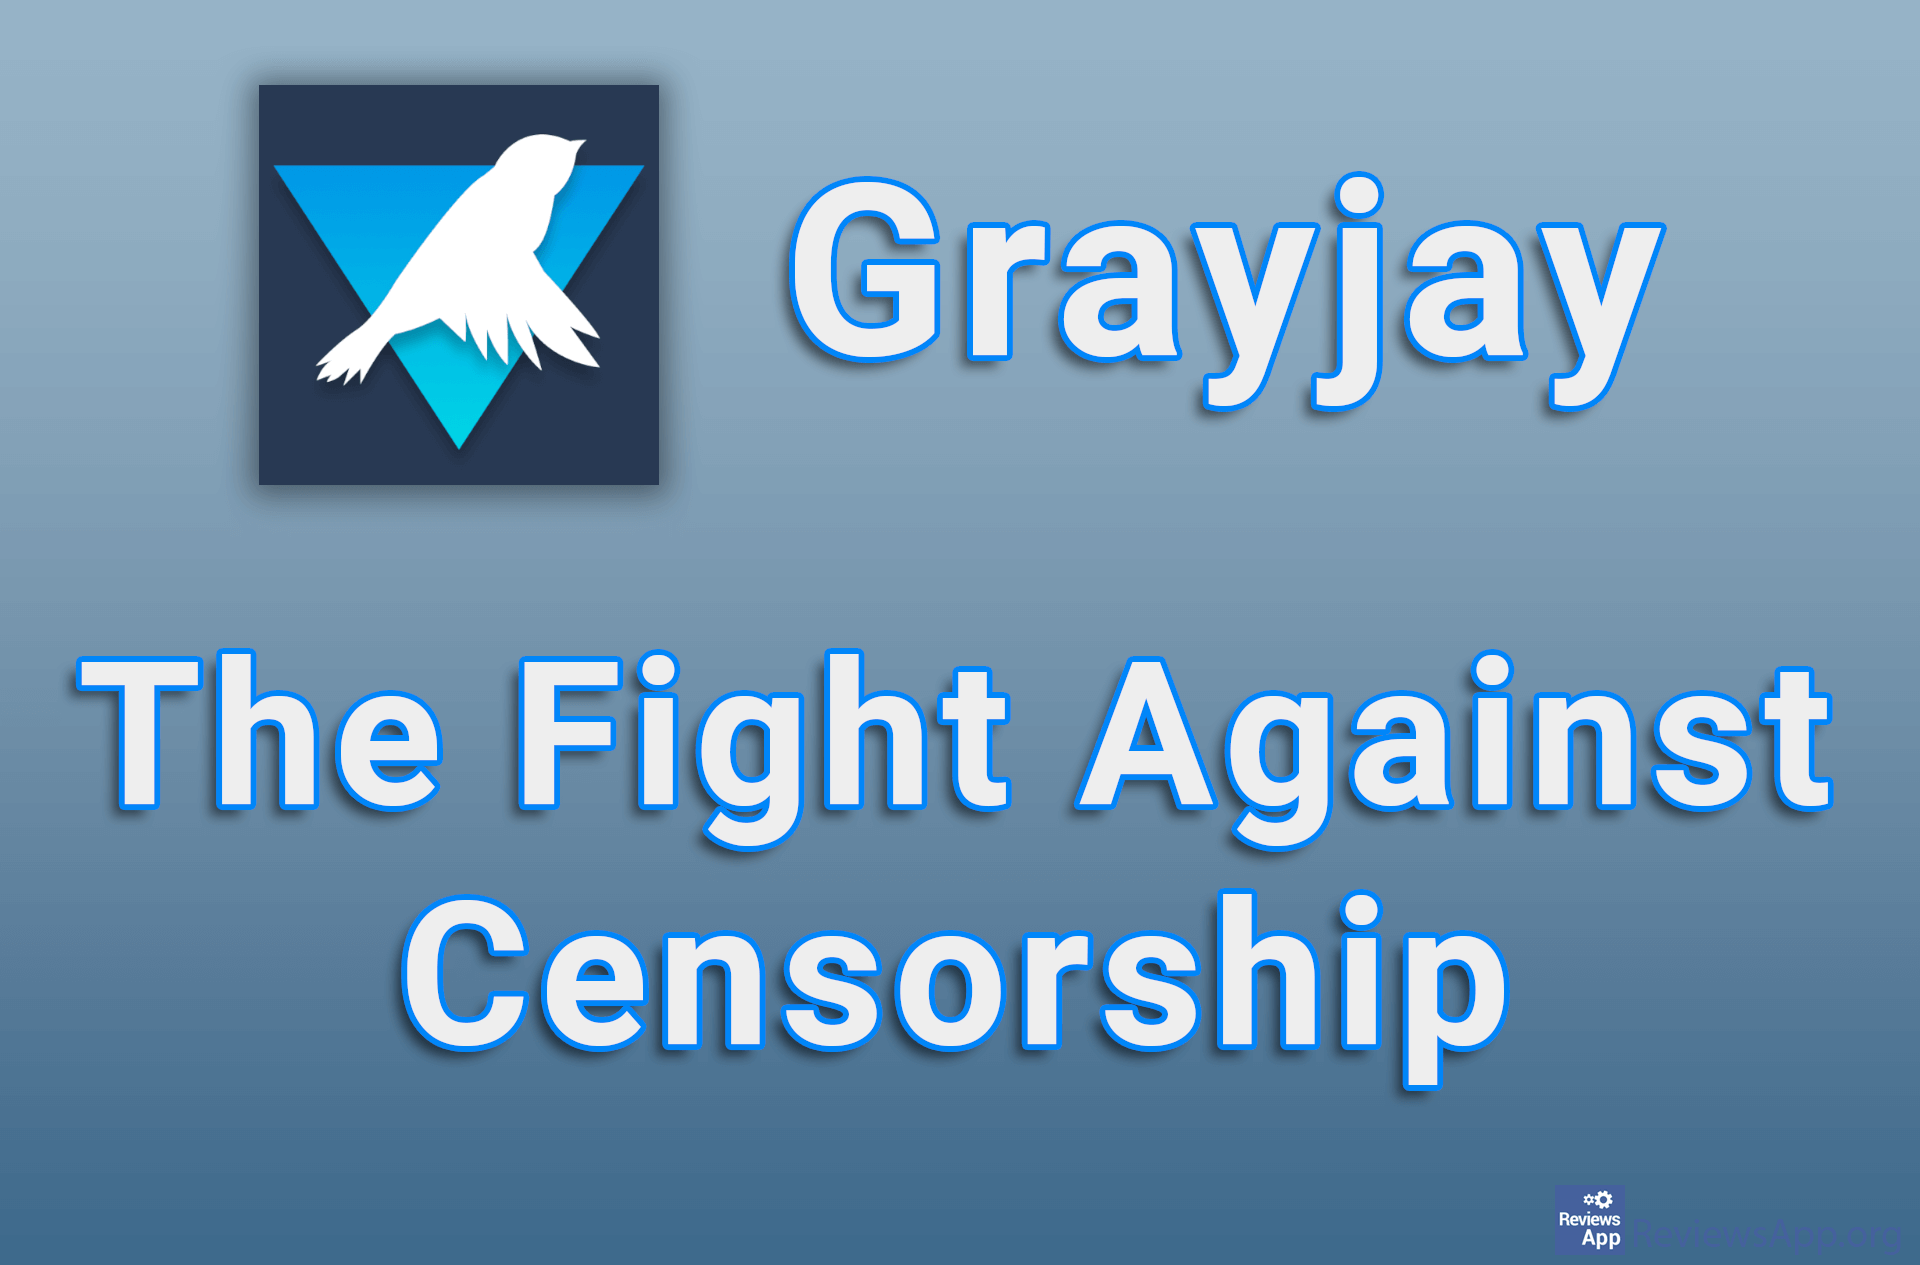 Grayjay – The Fight Against Censorship